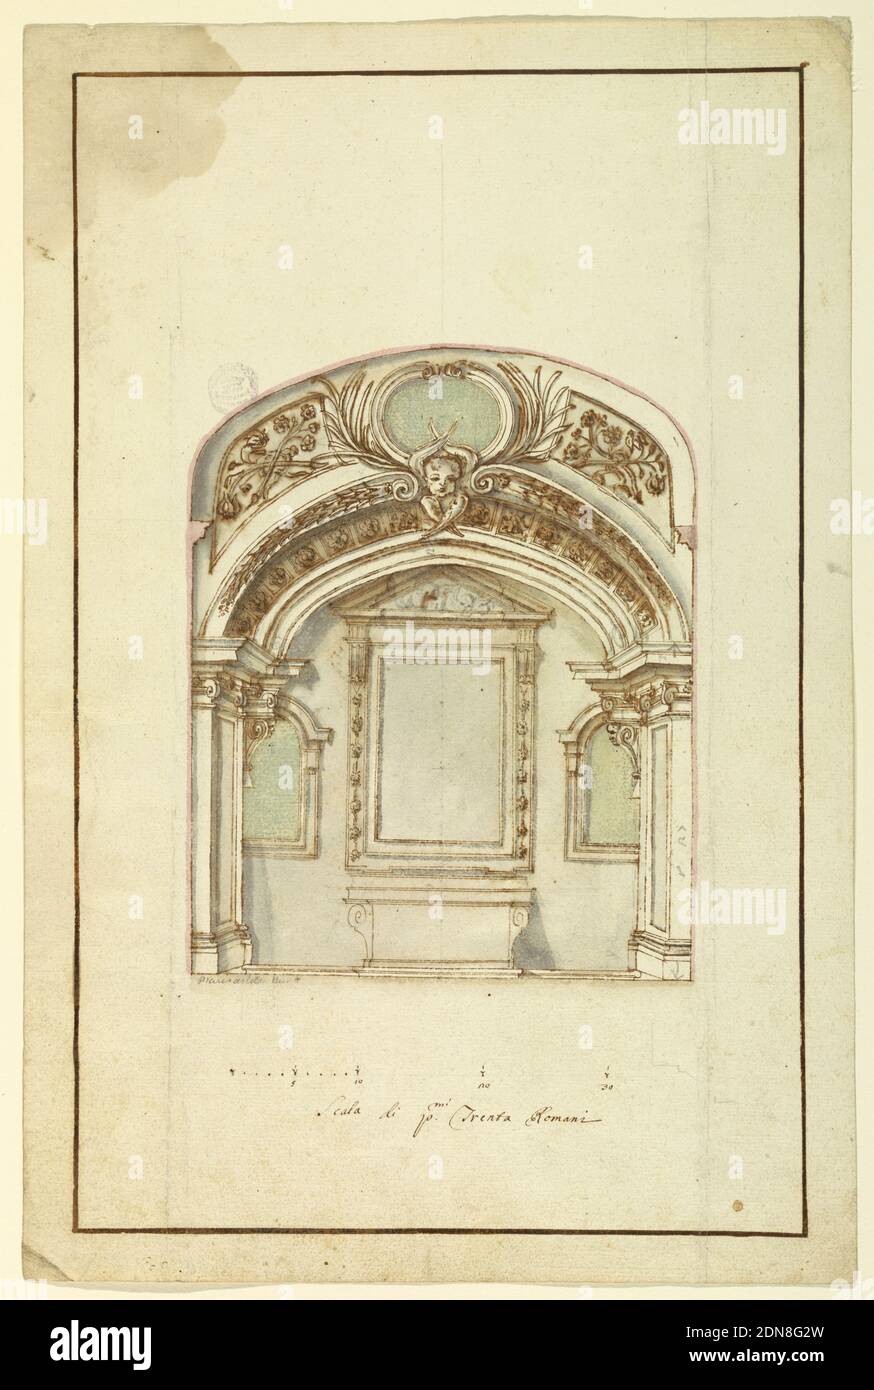 Project for the decoration of a chapel, Black chalk, pen, ink, brush, and grey, brown, greenish and rose water colors on paper., Vertical composition of a decorated chapel with framing lines. An arch and a section of a vaulted ceiling are shown in the foreground. The ceiling is decorated with an ovoidal frame with a chest, two palms branches and two panels with twigs. The altar is seen at the back wall with a mensa and a picture fram with a triangular pediment. Niches are shown on both sides. A measurement is inscribed in the pilaster on the right. Stock Photo